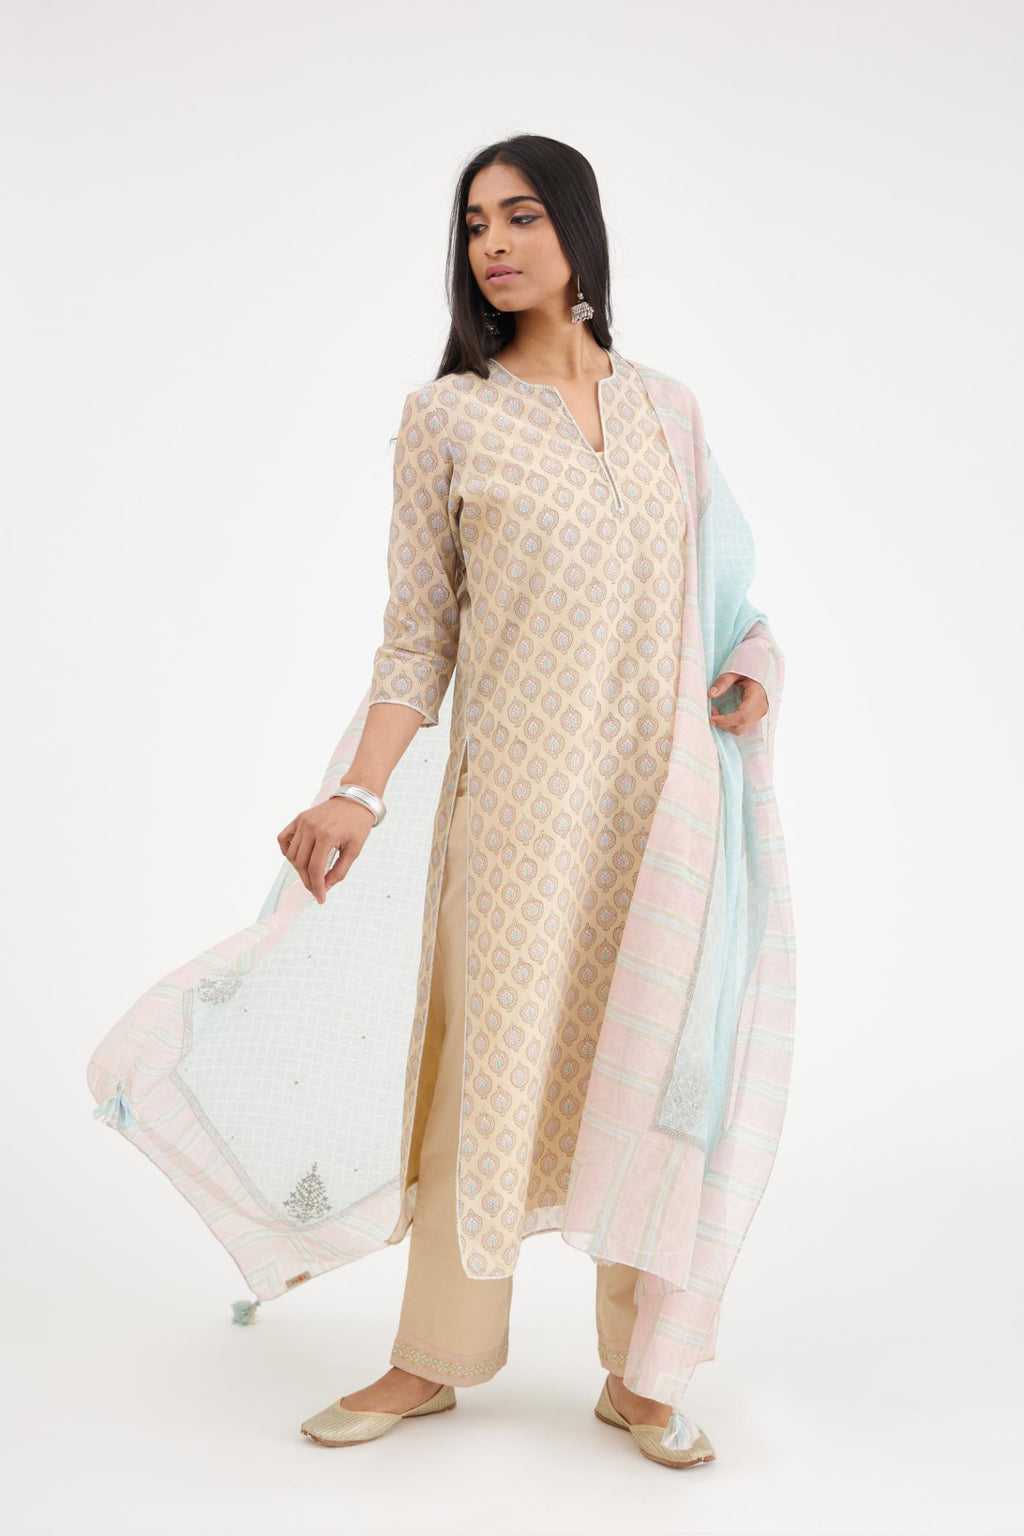 Beige silk chanderi straight kurta set with all-over hand block print and silver bugle beads detailing.